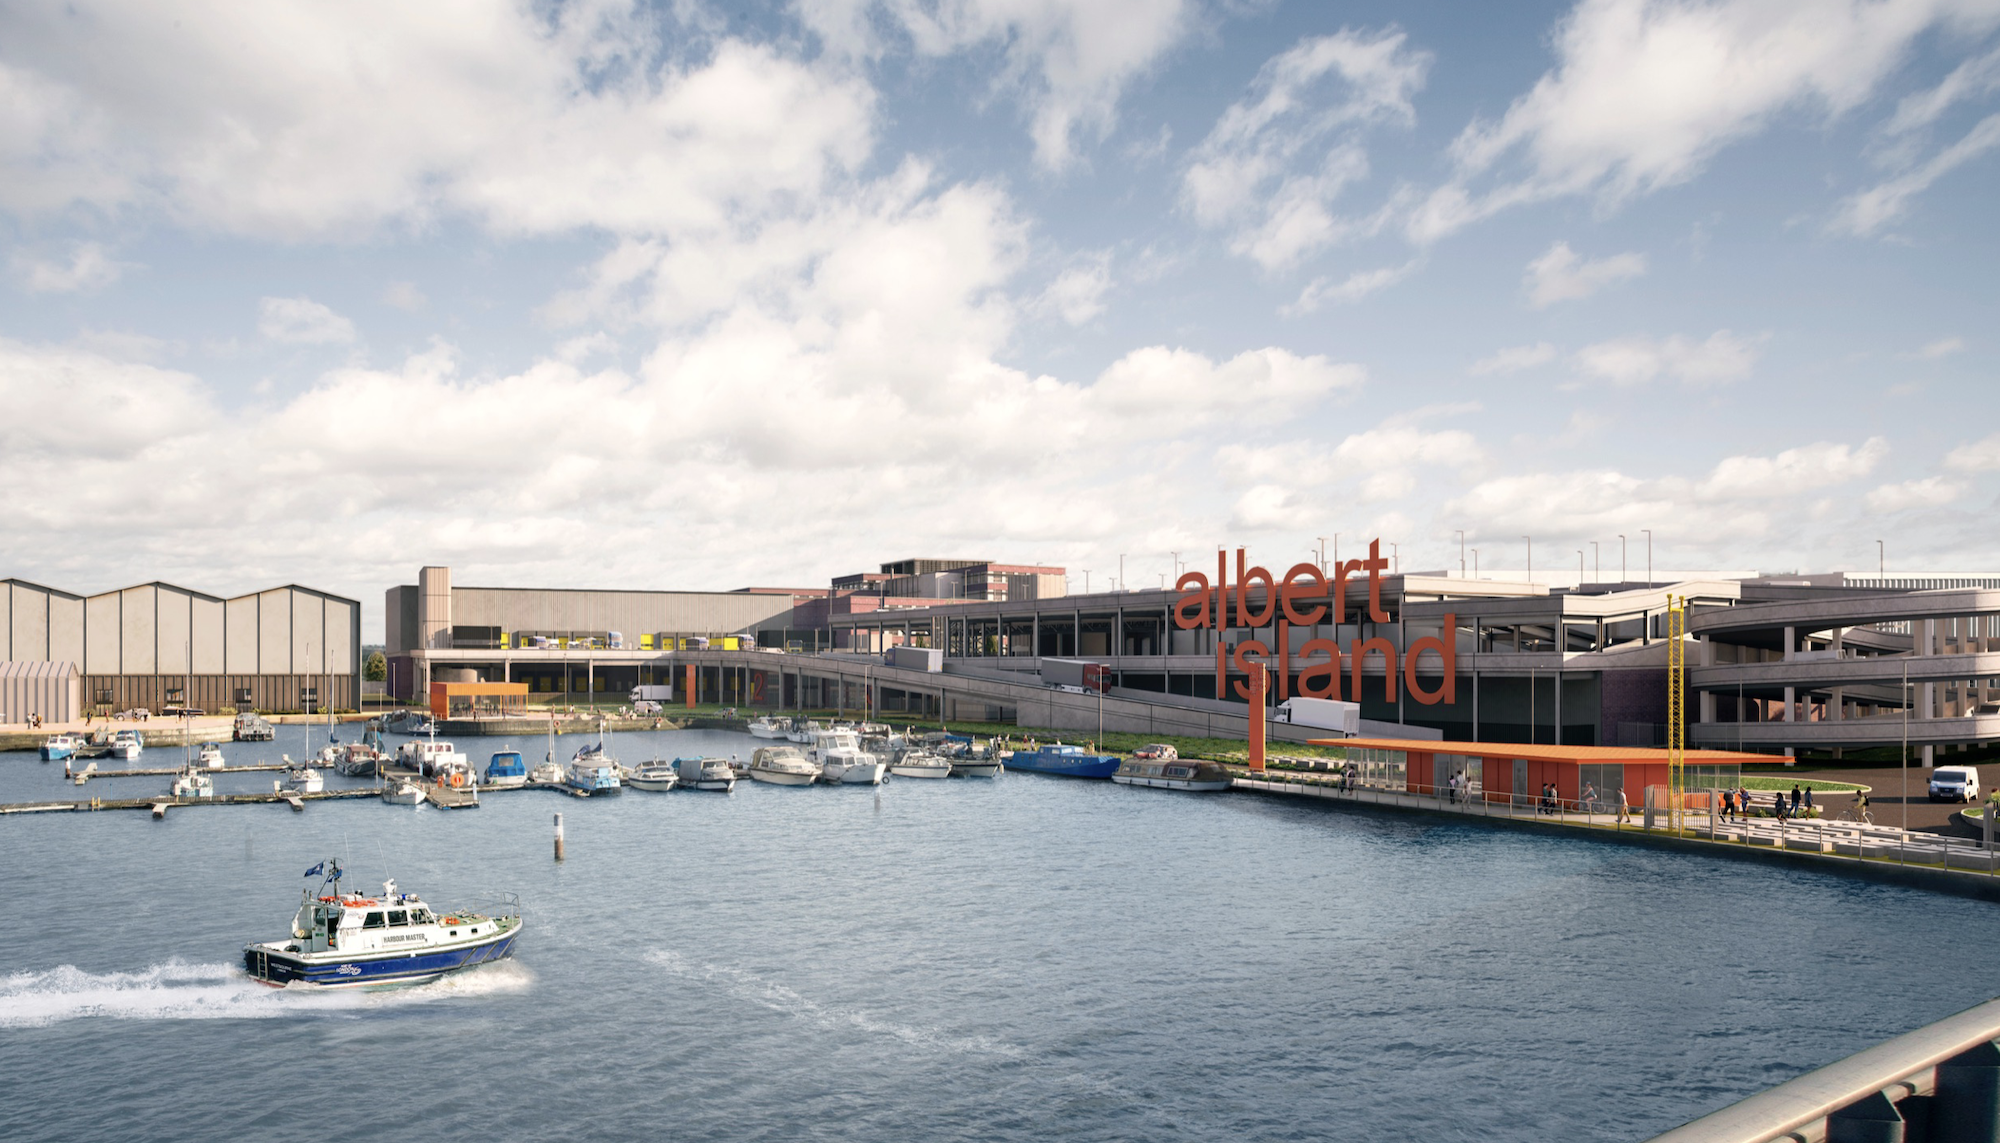 future artist impression of albert island, showing a boat coming into the new shipyard